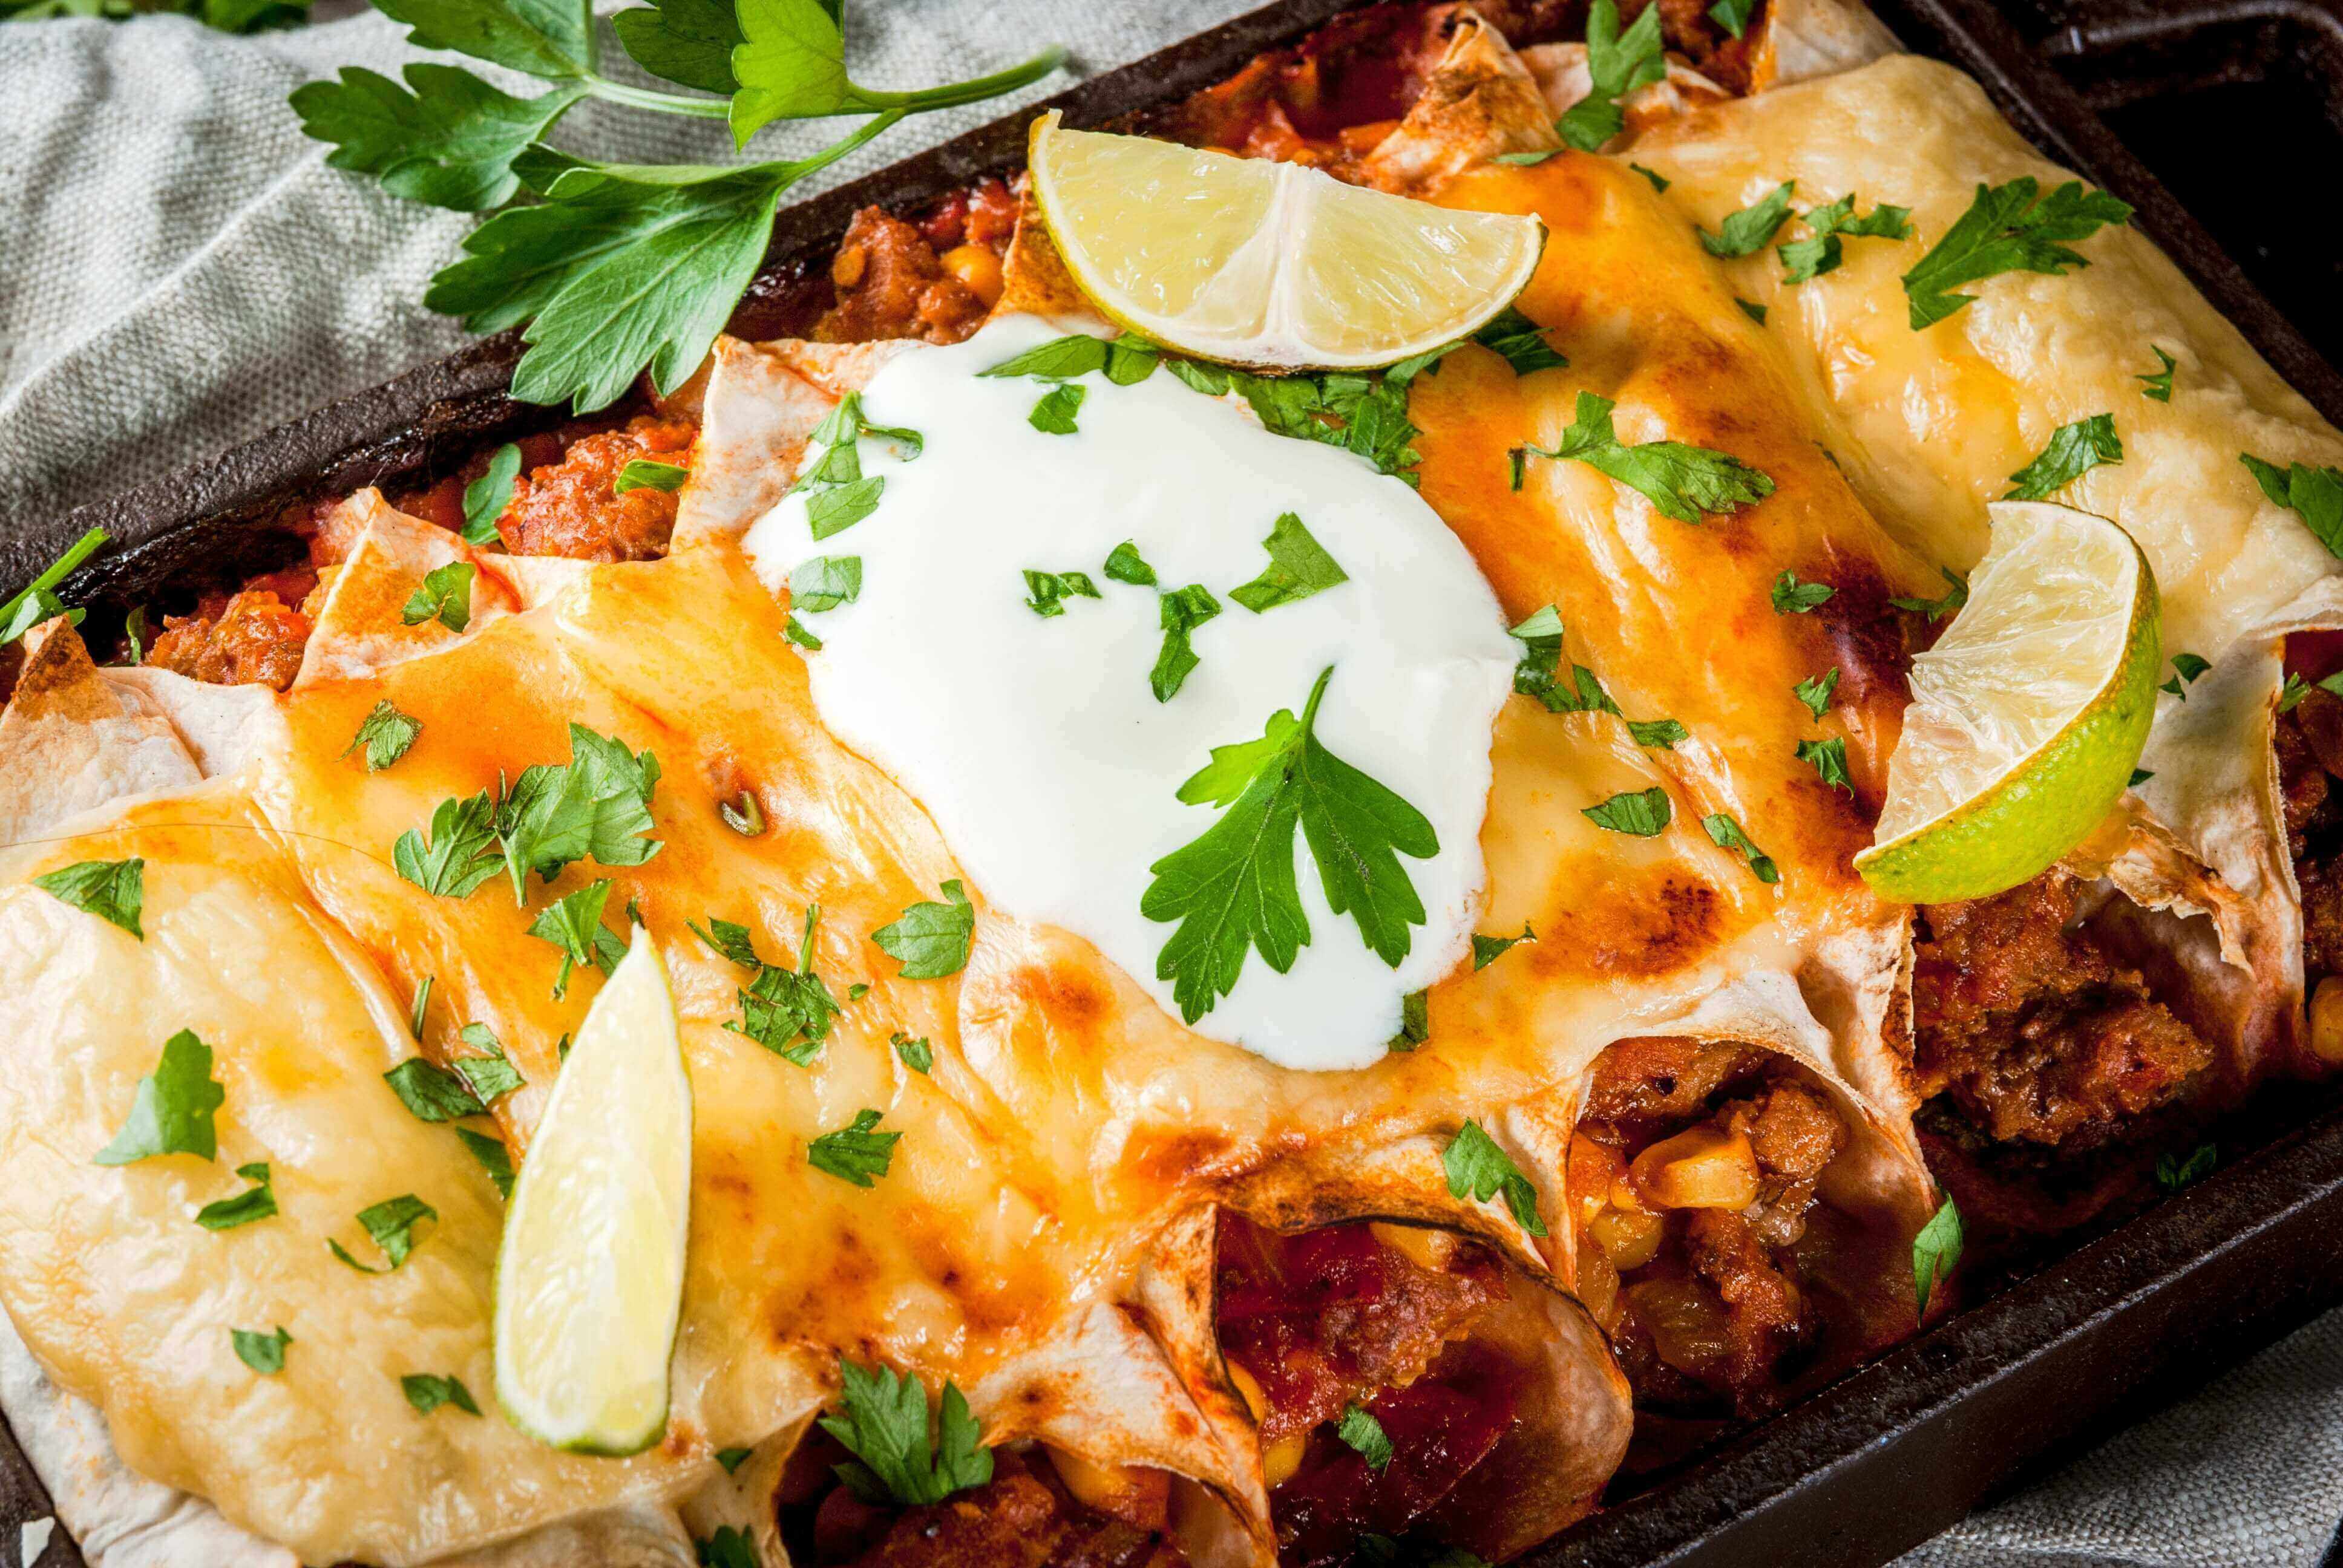 How To Make Enchiladas For A Mexican-Inspired Meal | Gopuff